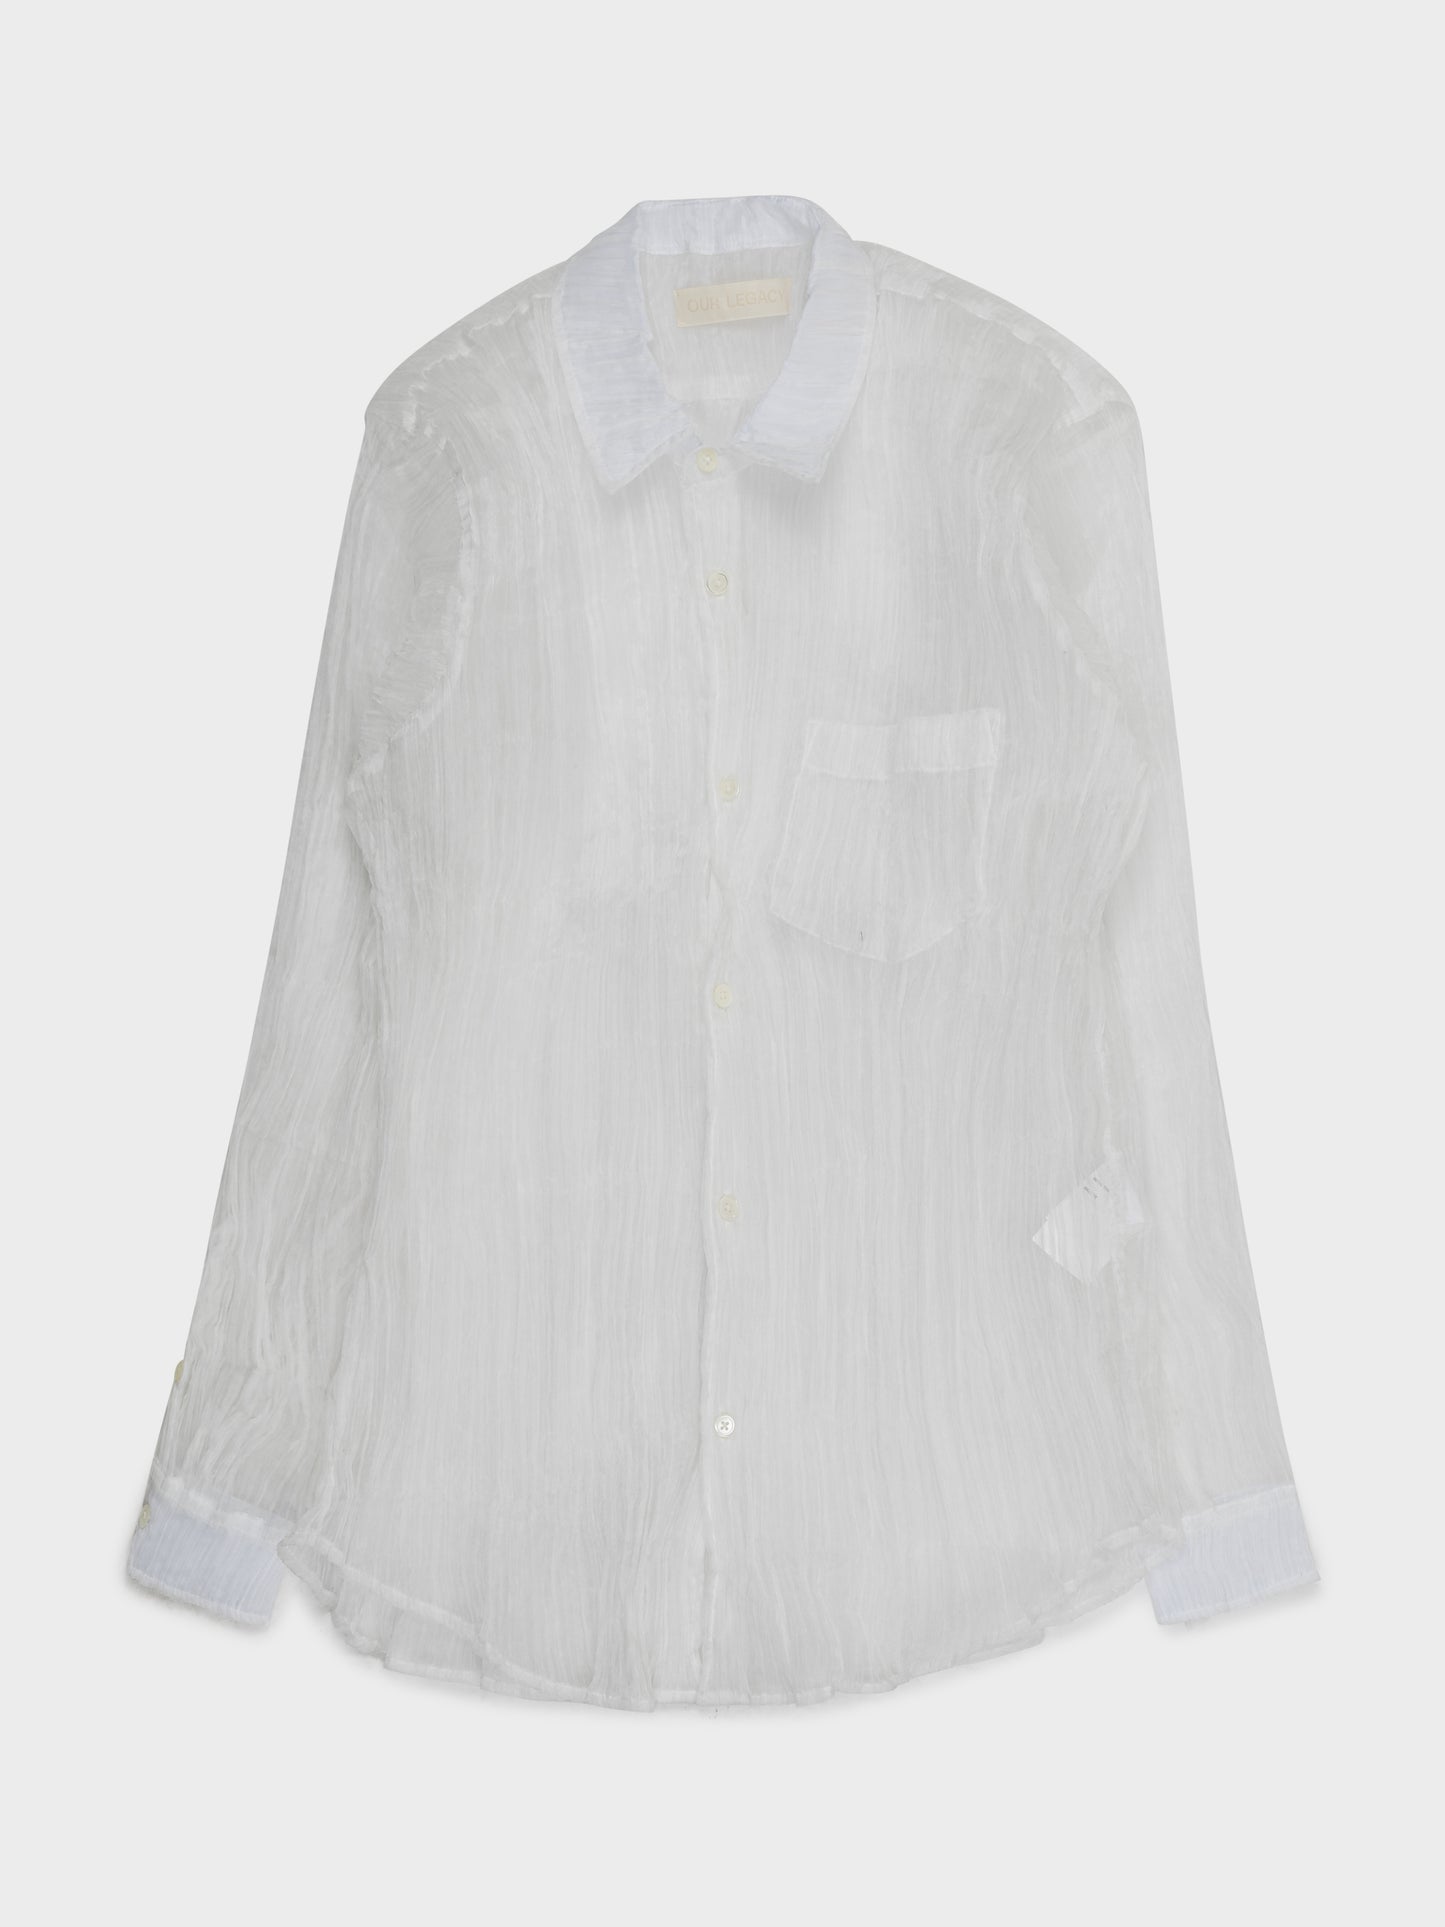 'Mother Of Pearl' Button Down